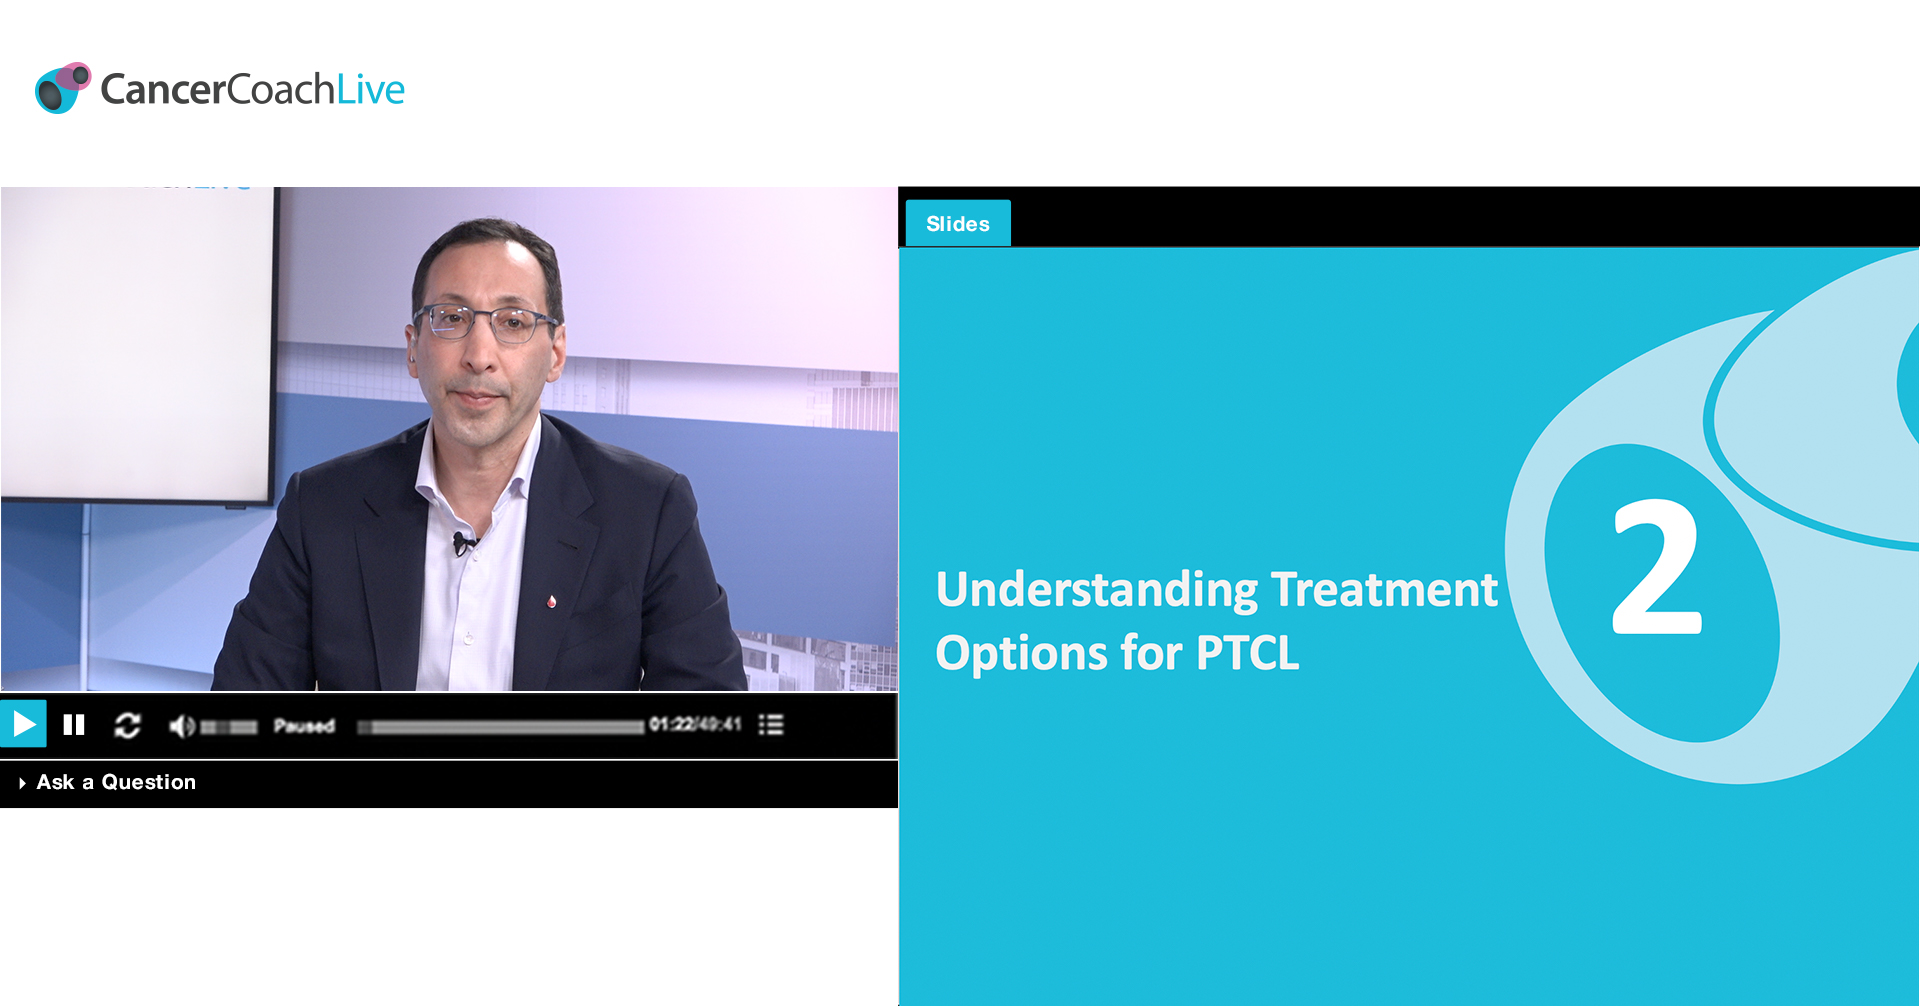 Chapter 2: Understanding Treatment Options for PTCL